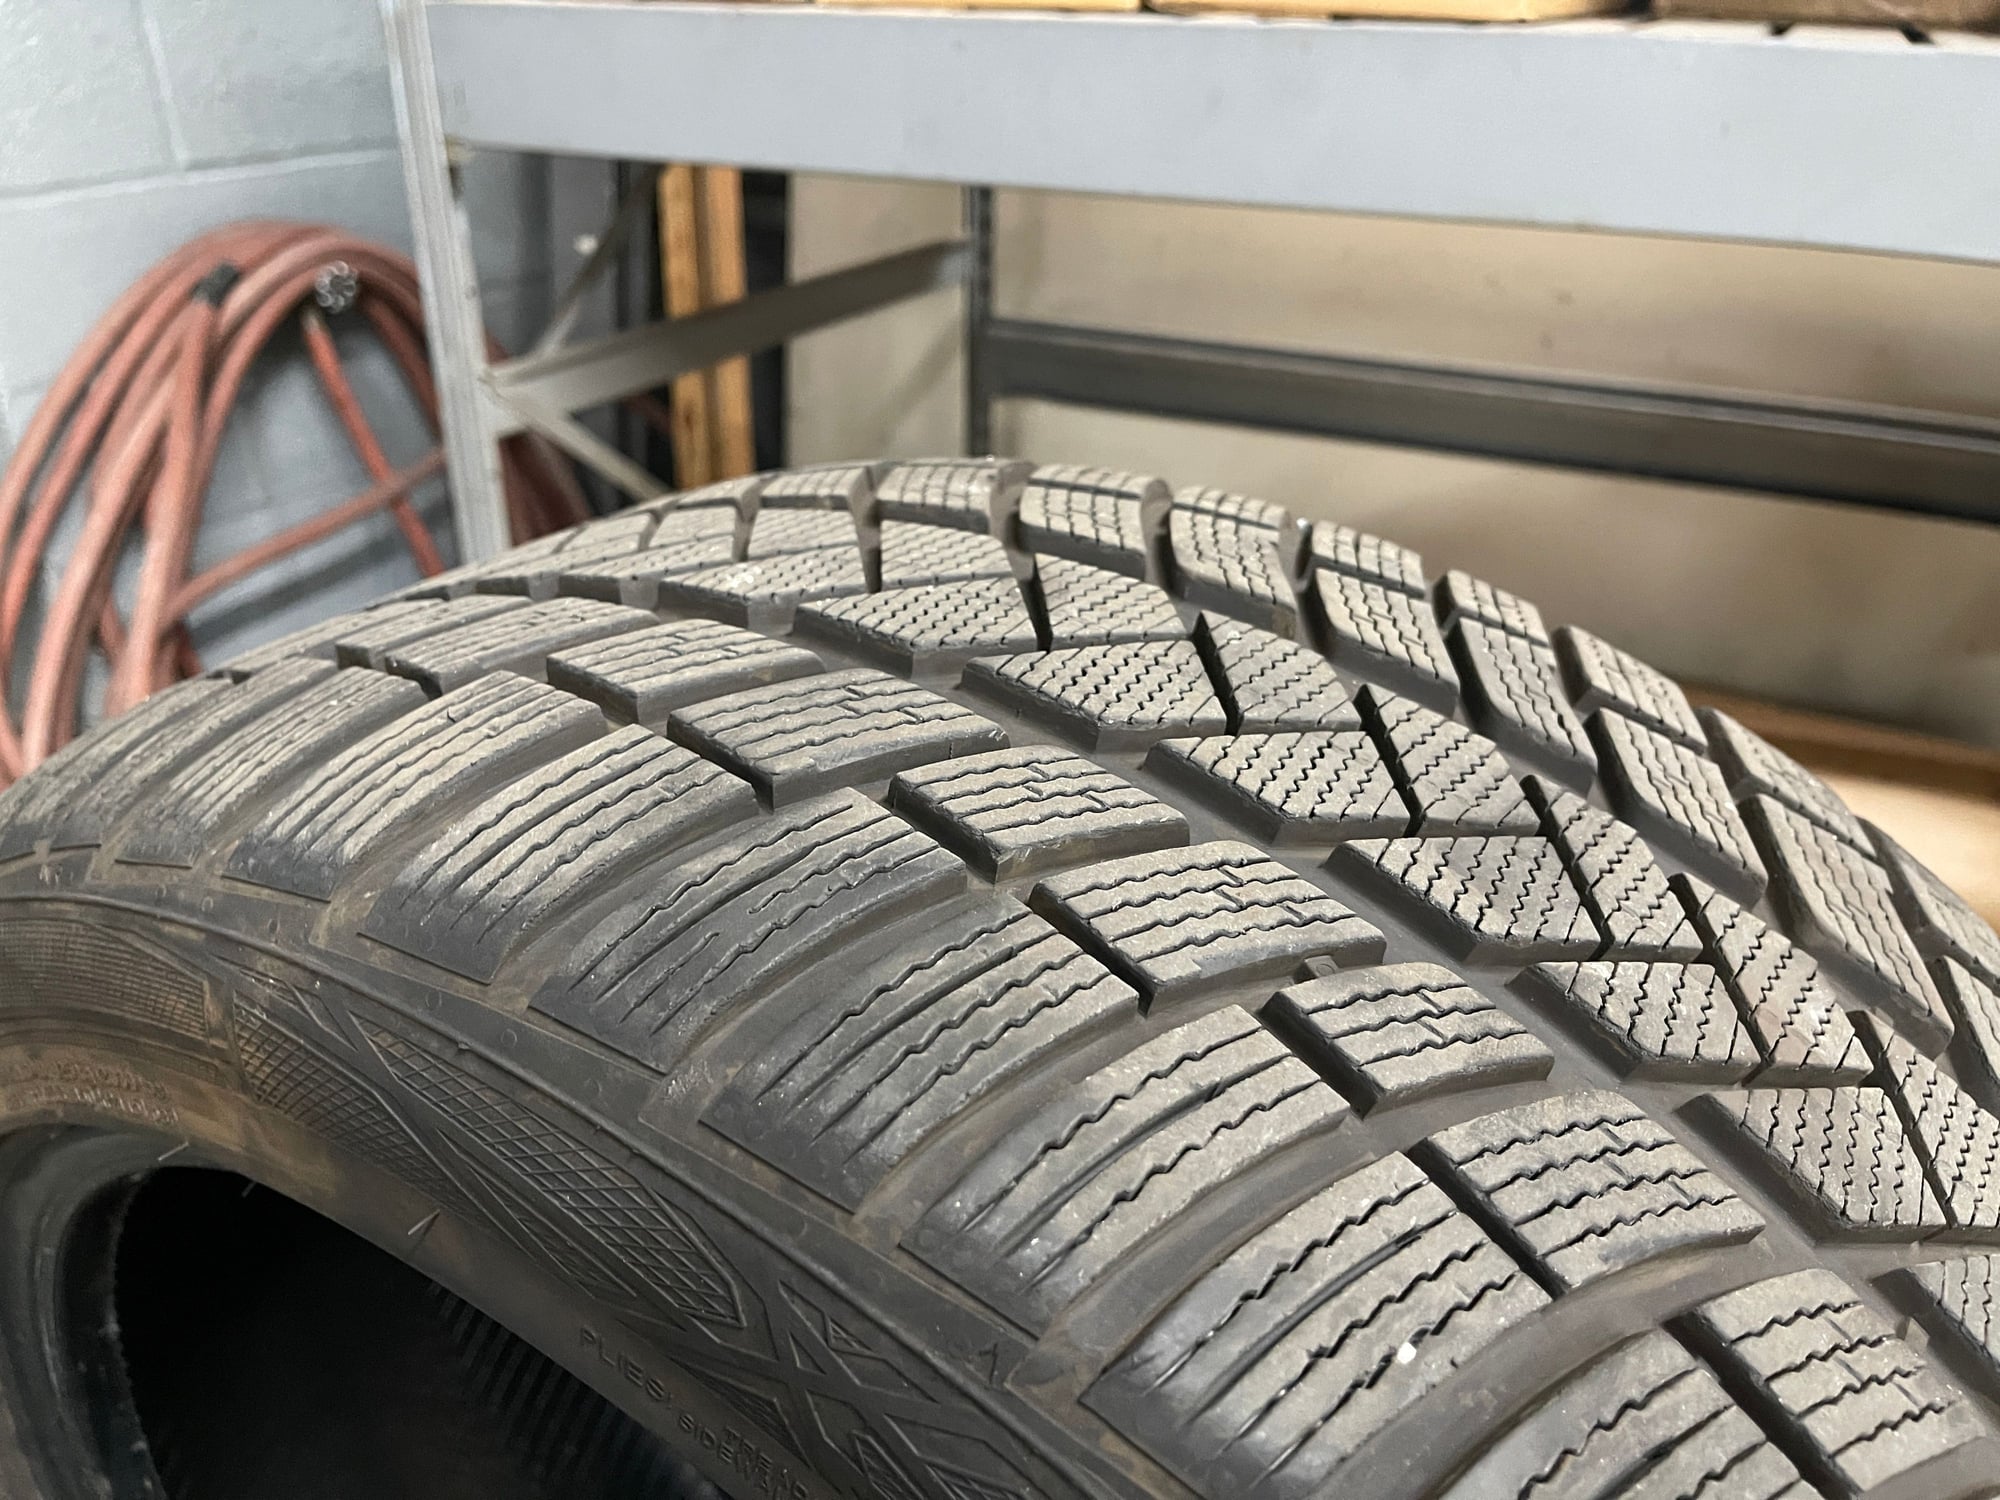 Wheels and Tires/Axles - 21" Wintrac pro winter tires (GLC63S) $975 - Used - 2019 to 2021 Mercedes-Benz GLC63 AMG S - Edgewater, NJ 07020, United States